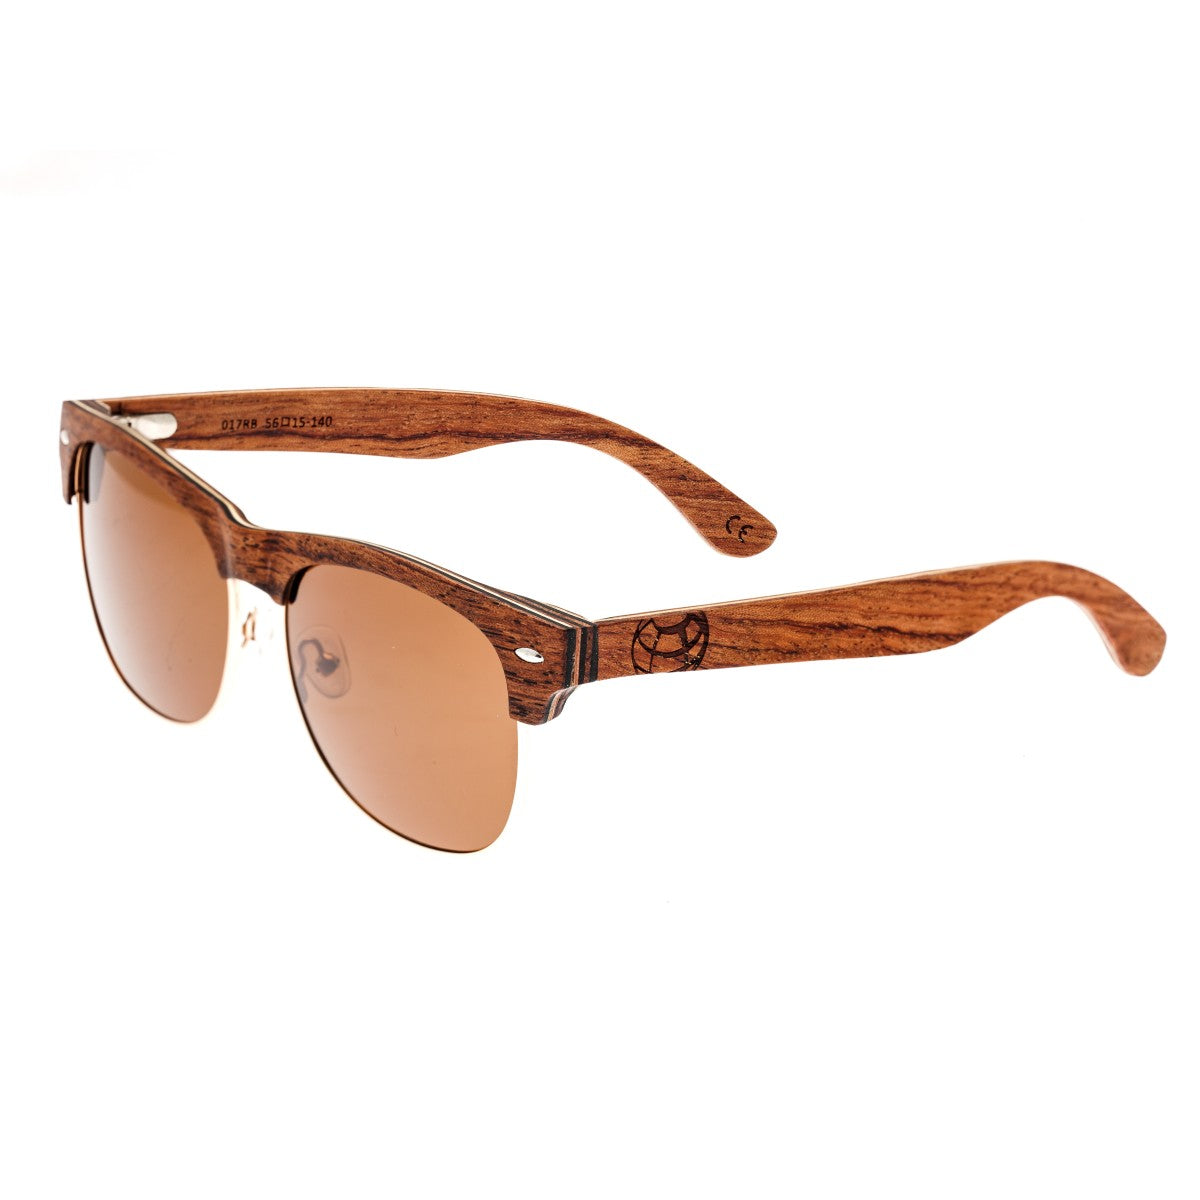 Earth Wood Moonstone Polarized Sunglasses - Red Rosewood/Brown - ESG017RB